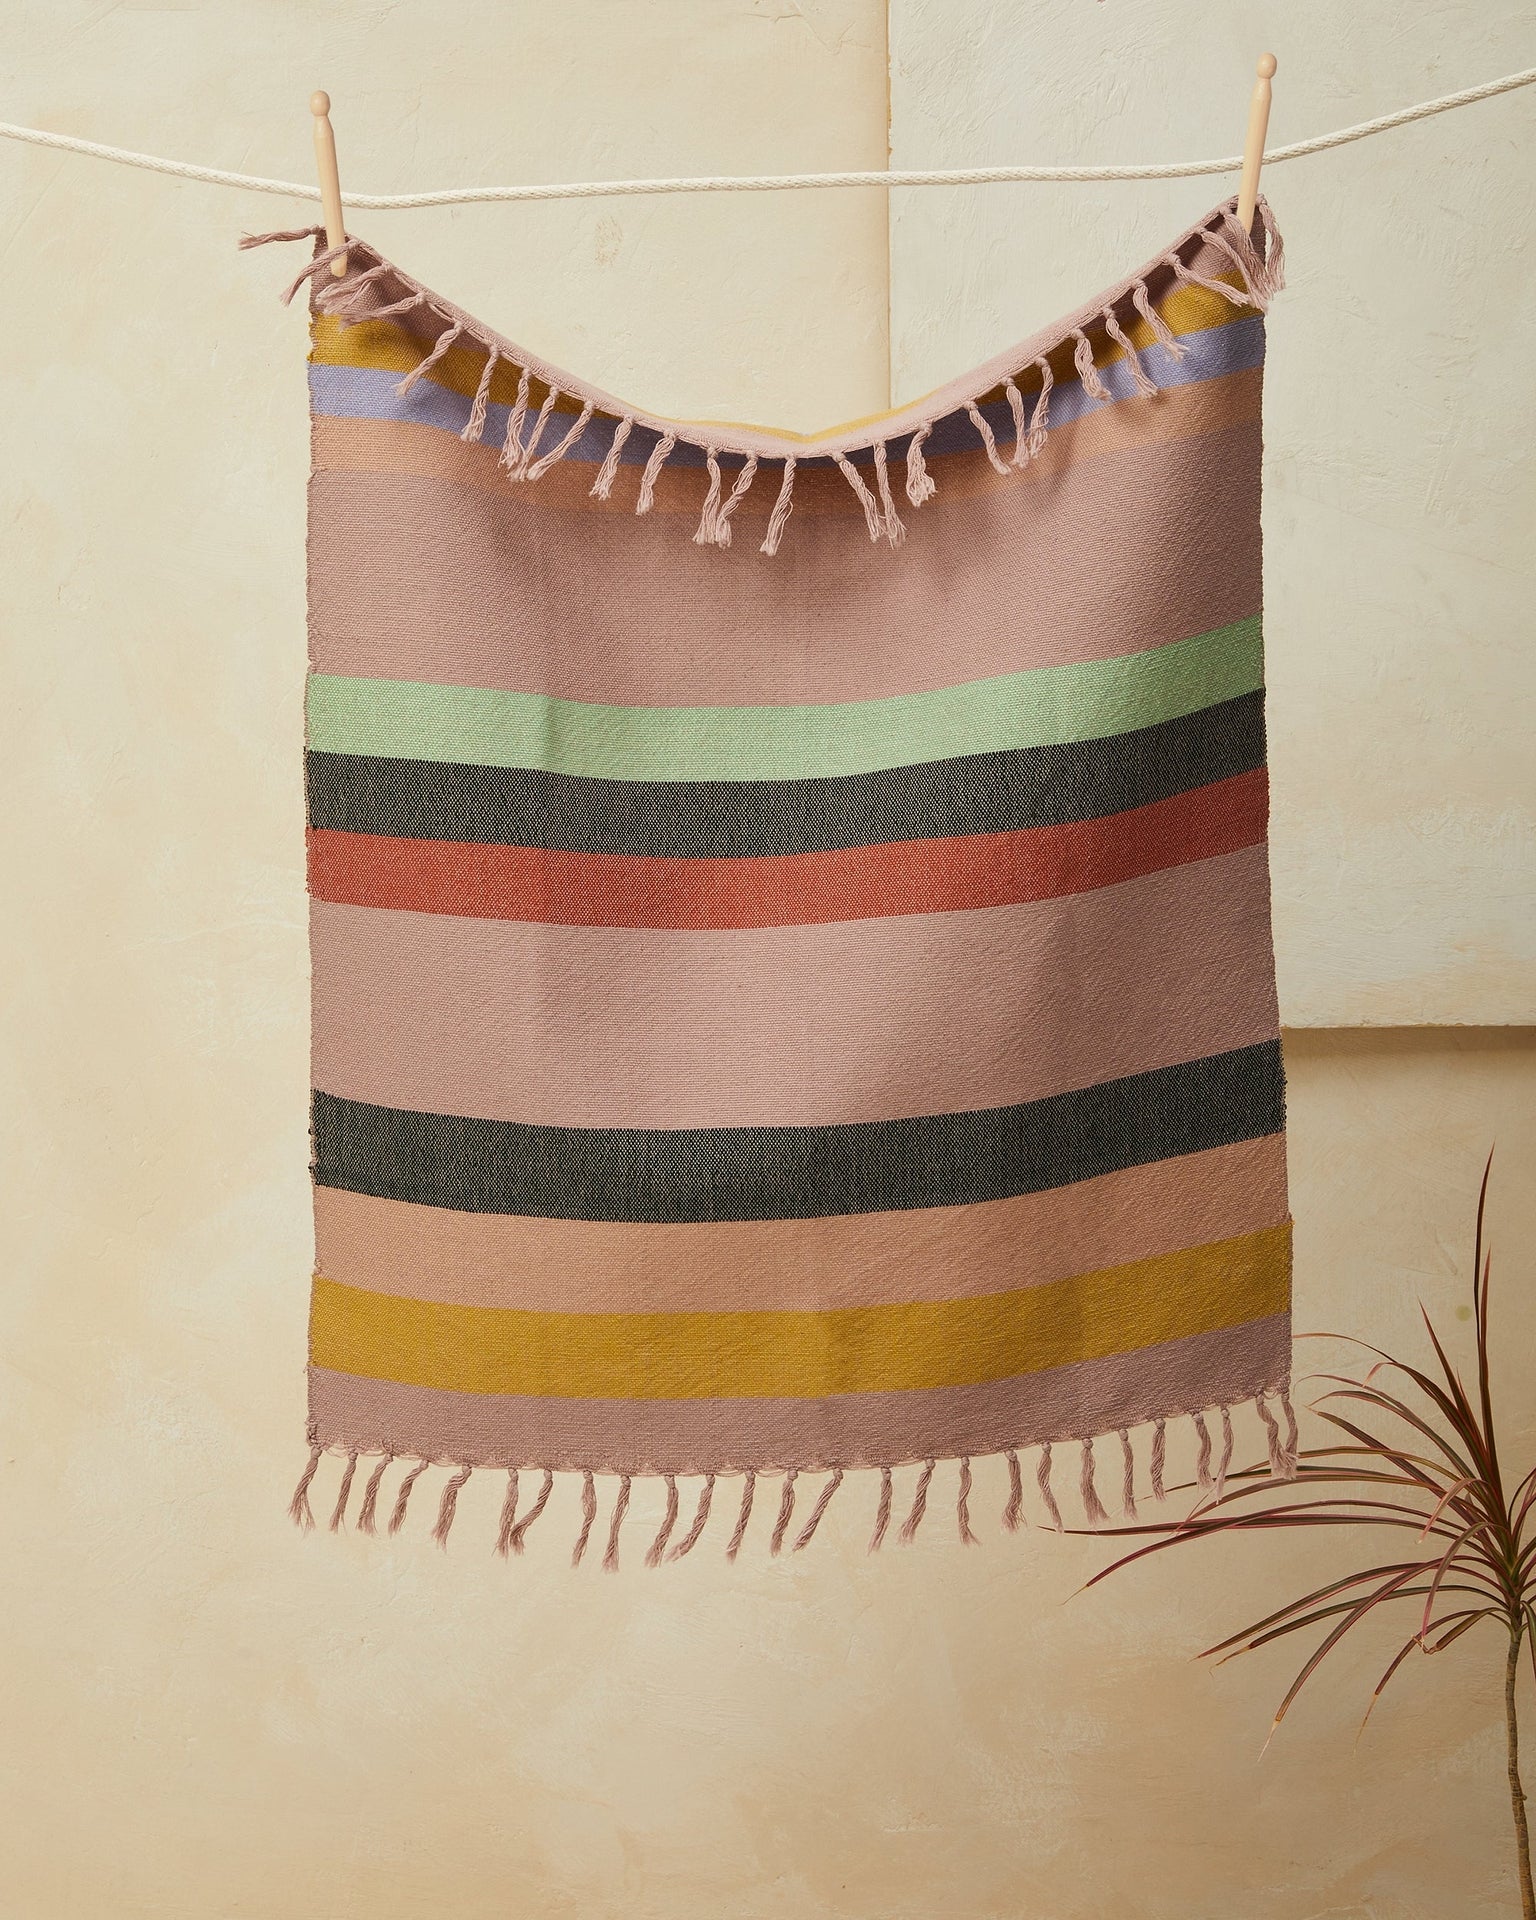 This tea towel is a classic yet modern addition to any kitchen or bathroom. Soft enough to function as hand towels, and durable enough to soak up spills around the kitchen. You can also use them as a centerpiece of a coffee or dining table. Finished with a rustic edge and fringe. Handwoven in Oaxaca, Mexico.